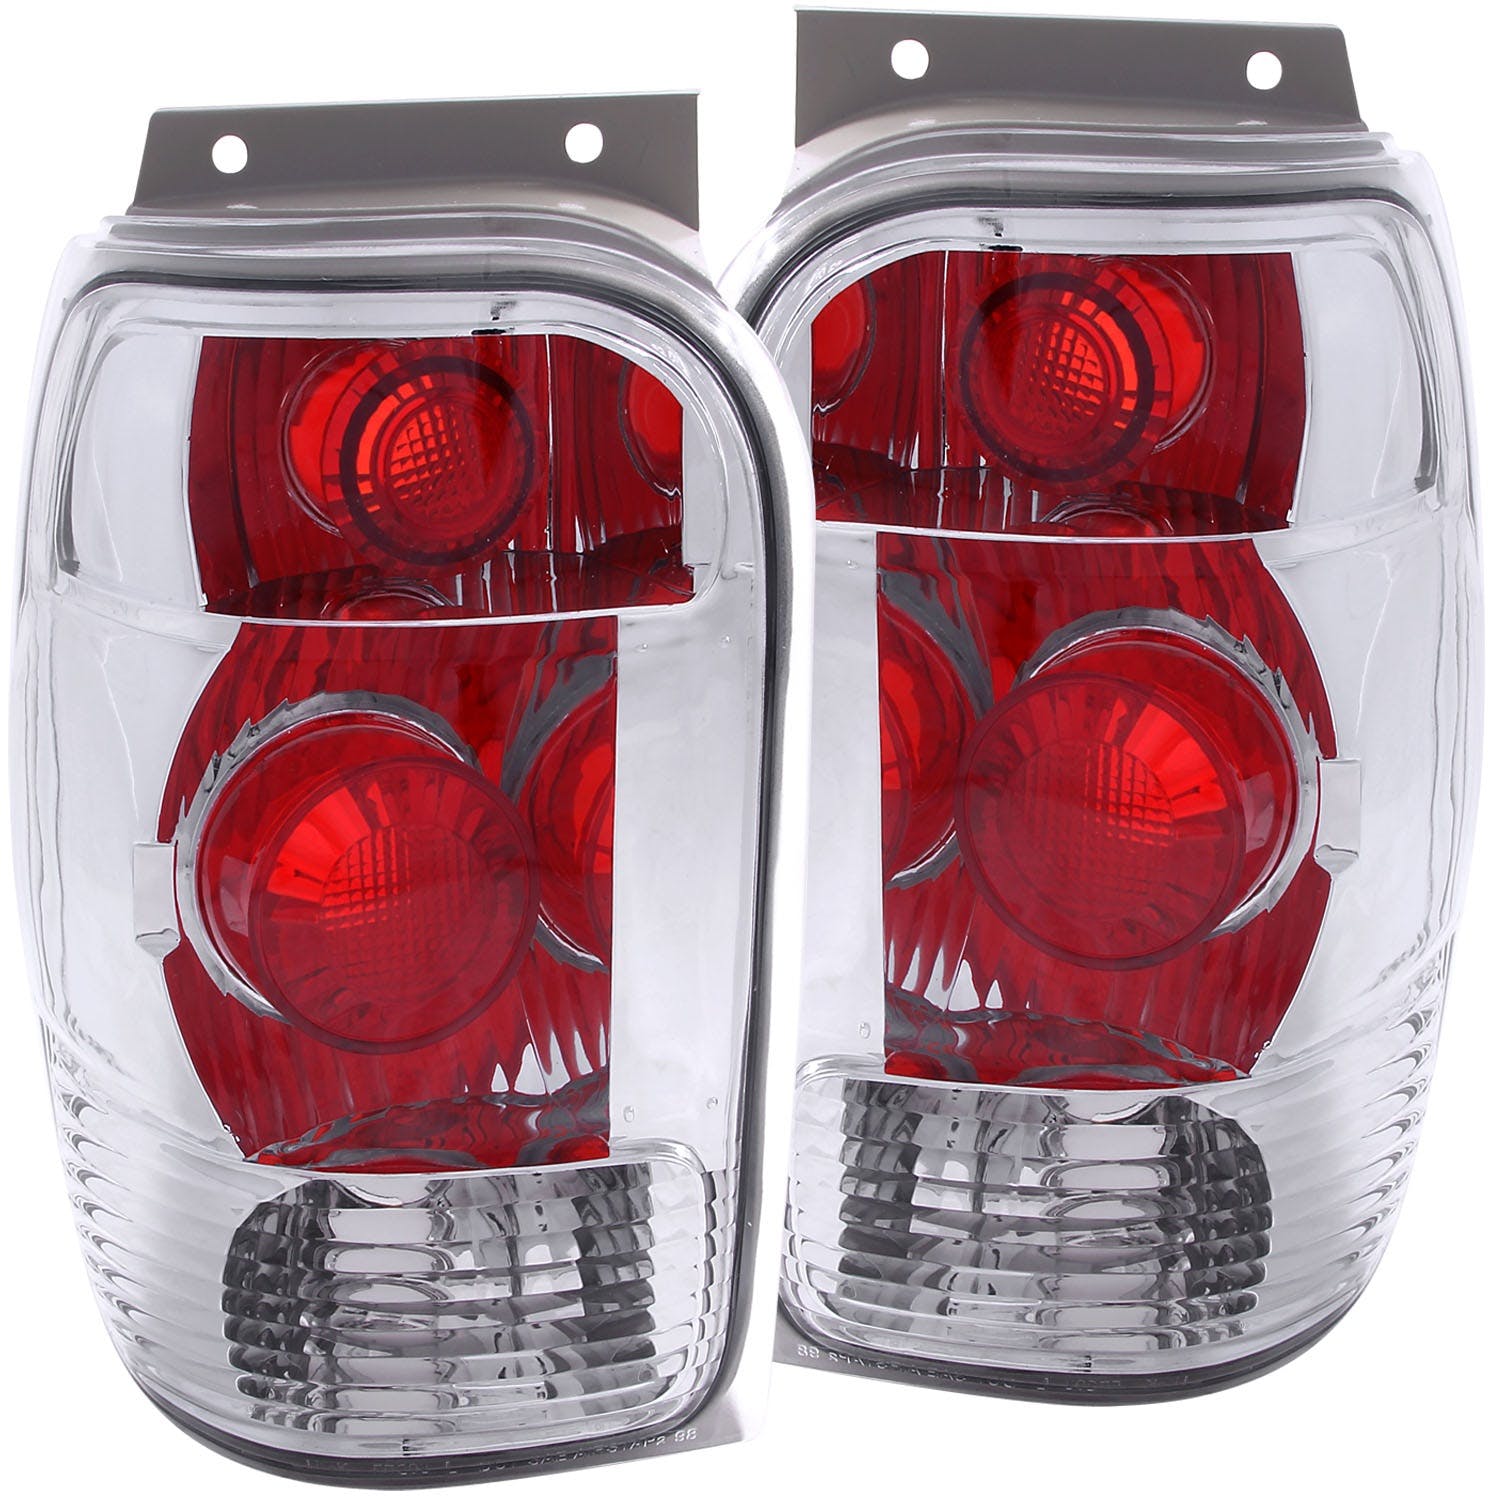 AnzoUSA 211082 Taillights Chrome